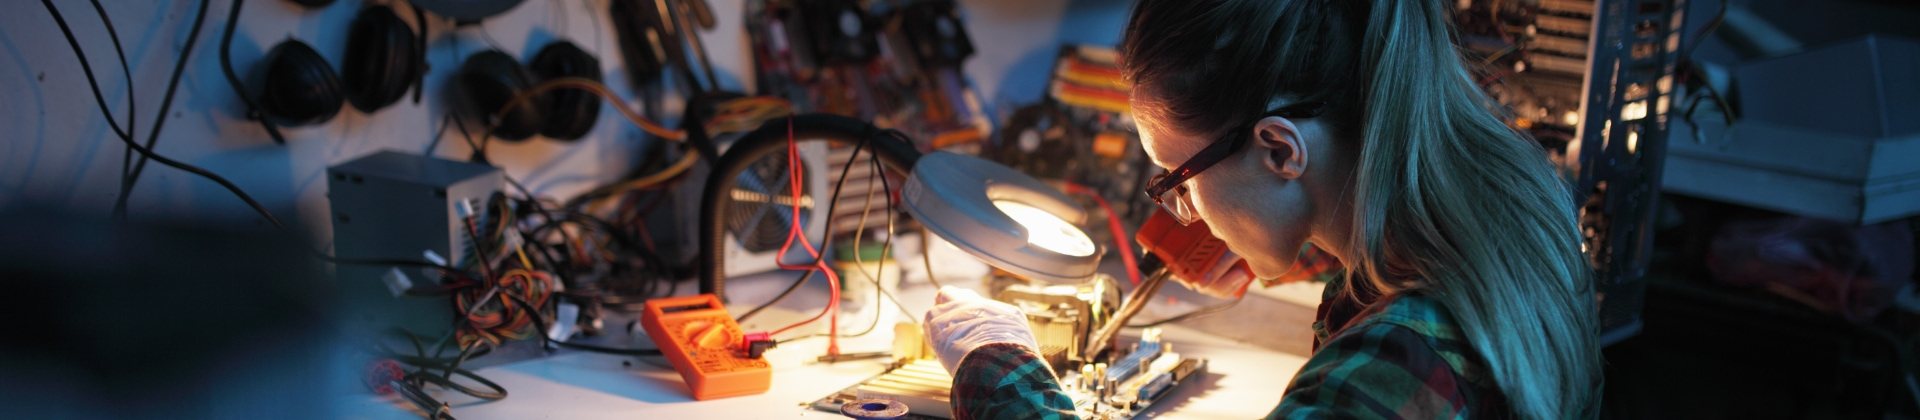 woman works on a circuit board